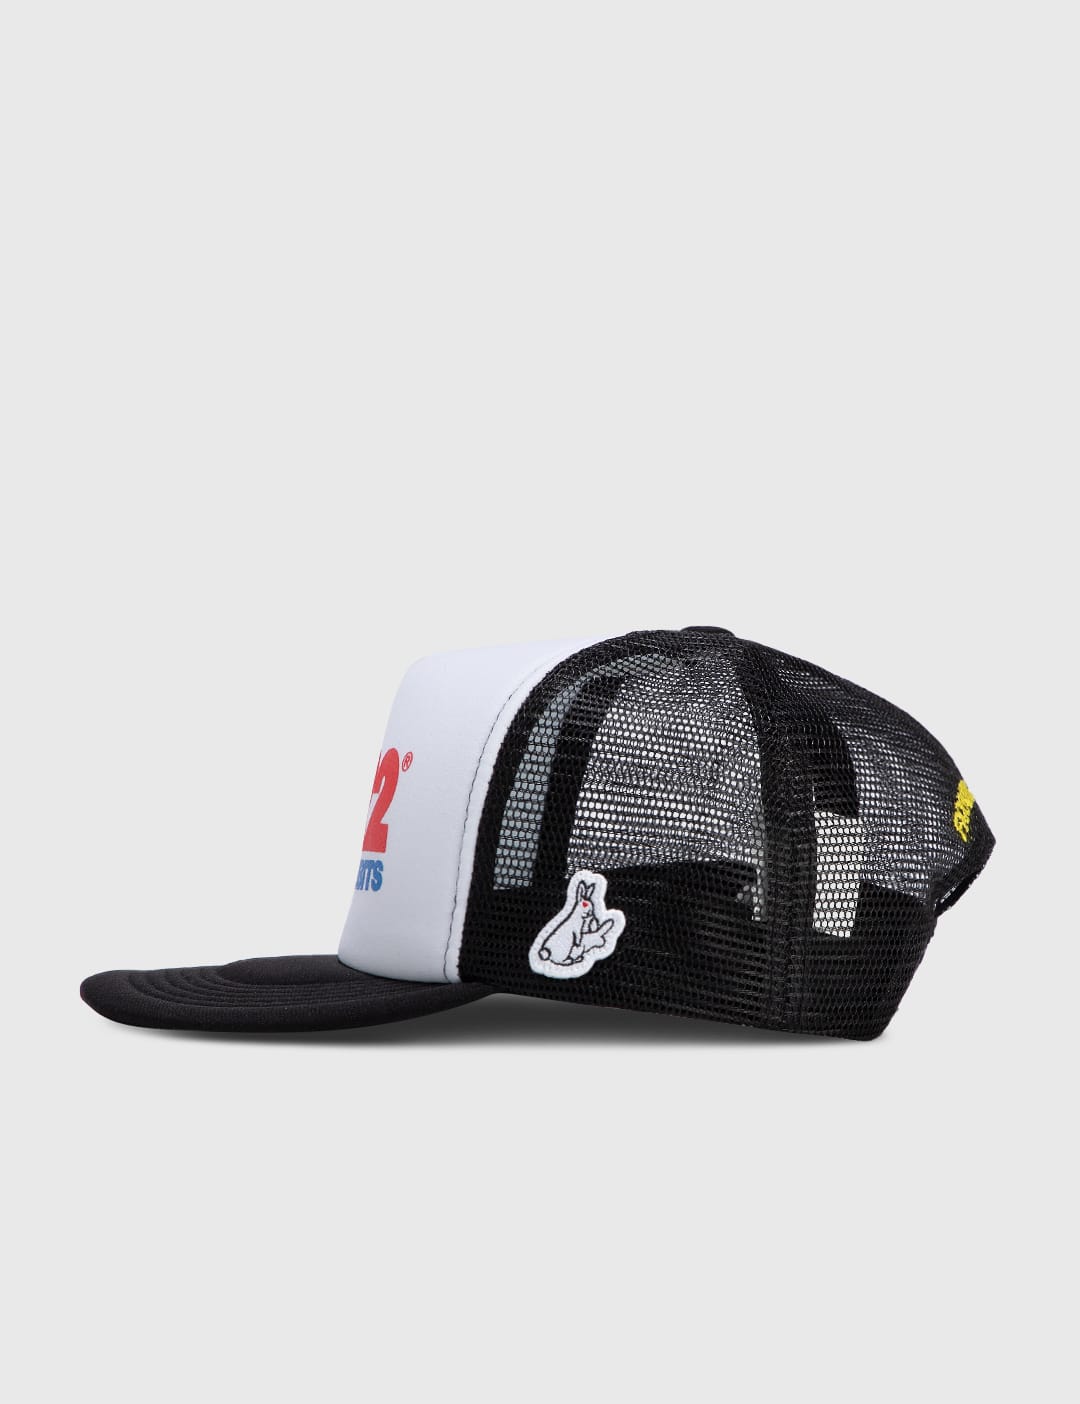 FR2 - American Logo Mesh Cap | HBX - Globally Curated Fashion and 